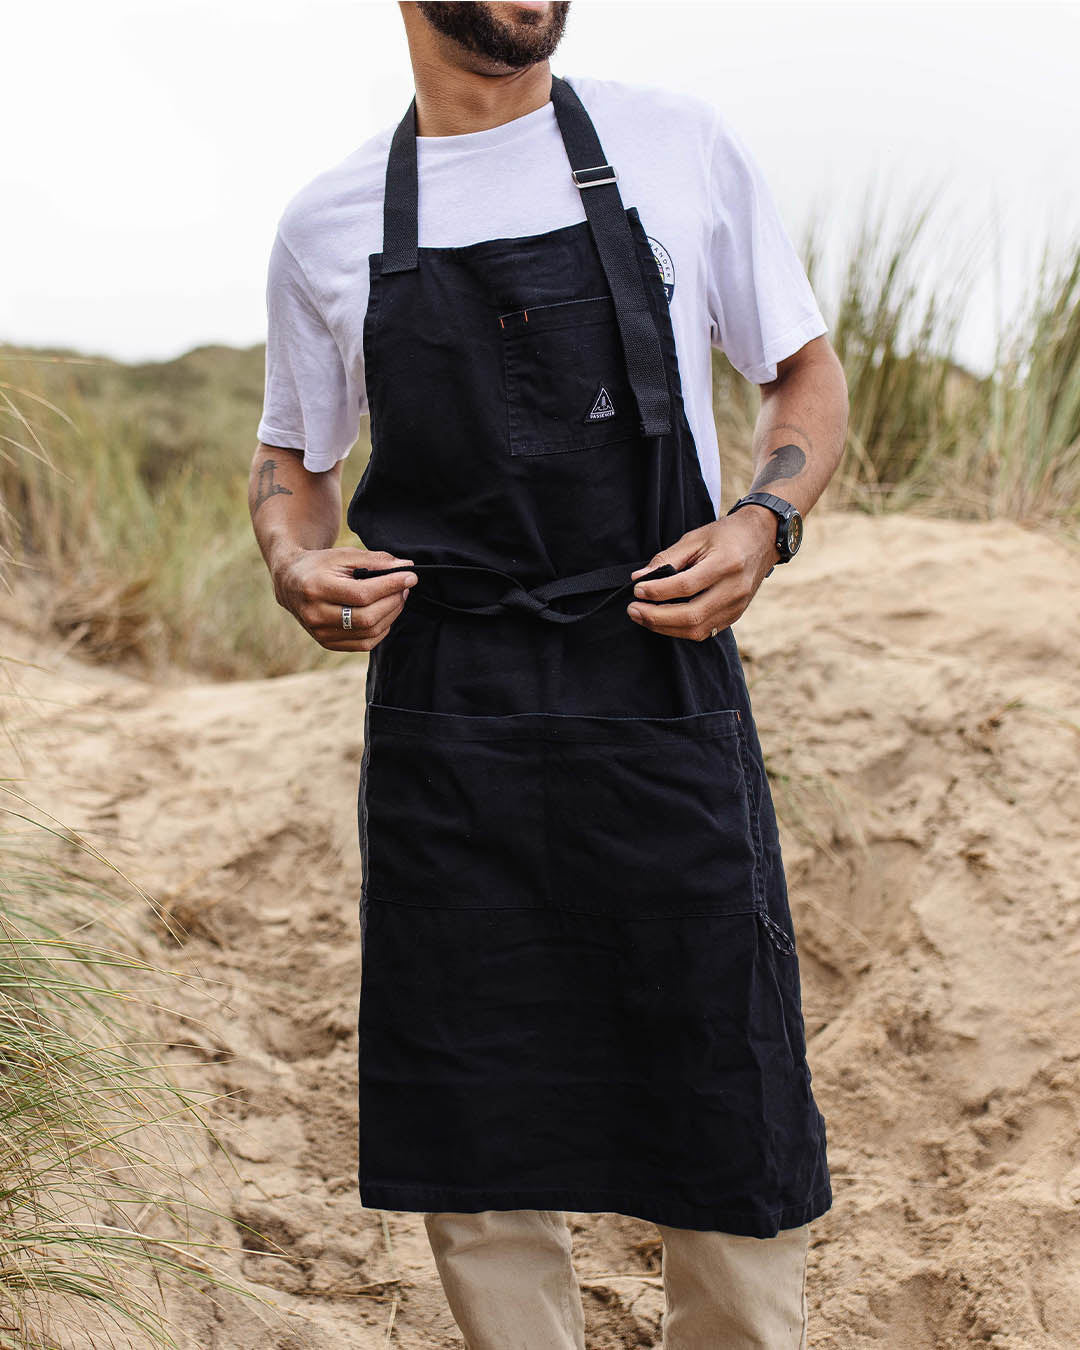 Male_Yard Recycled Cotton Apron - Black